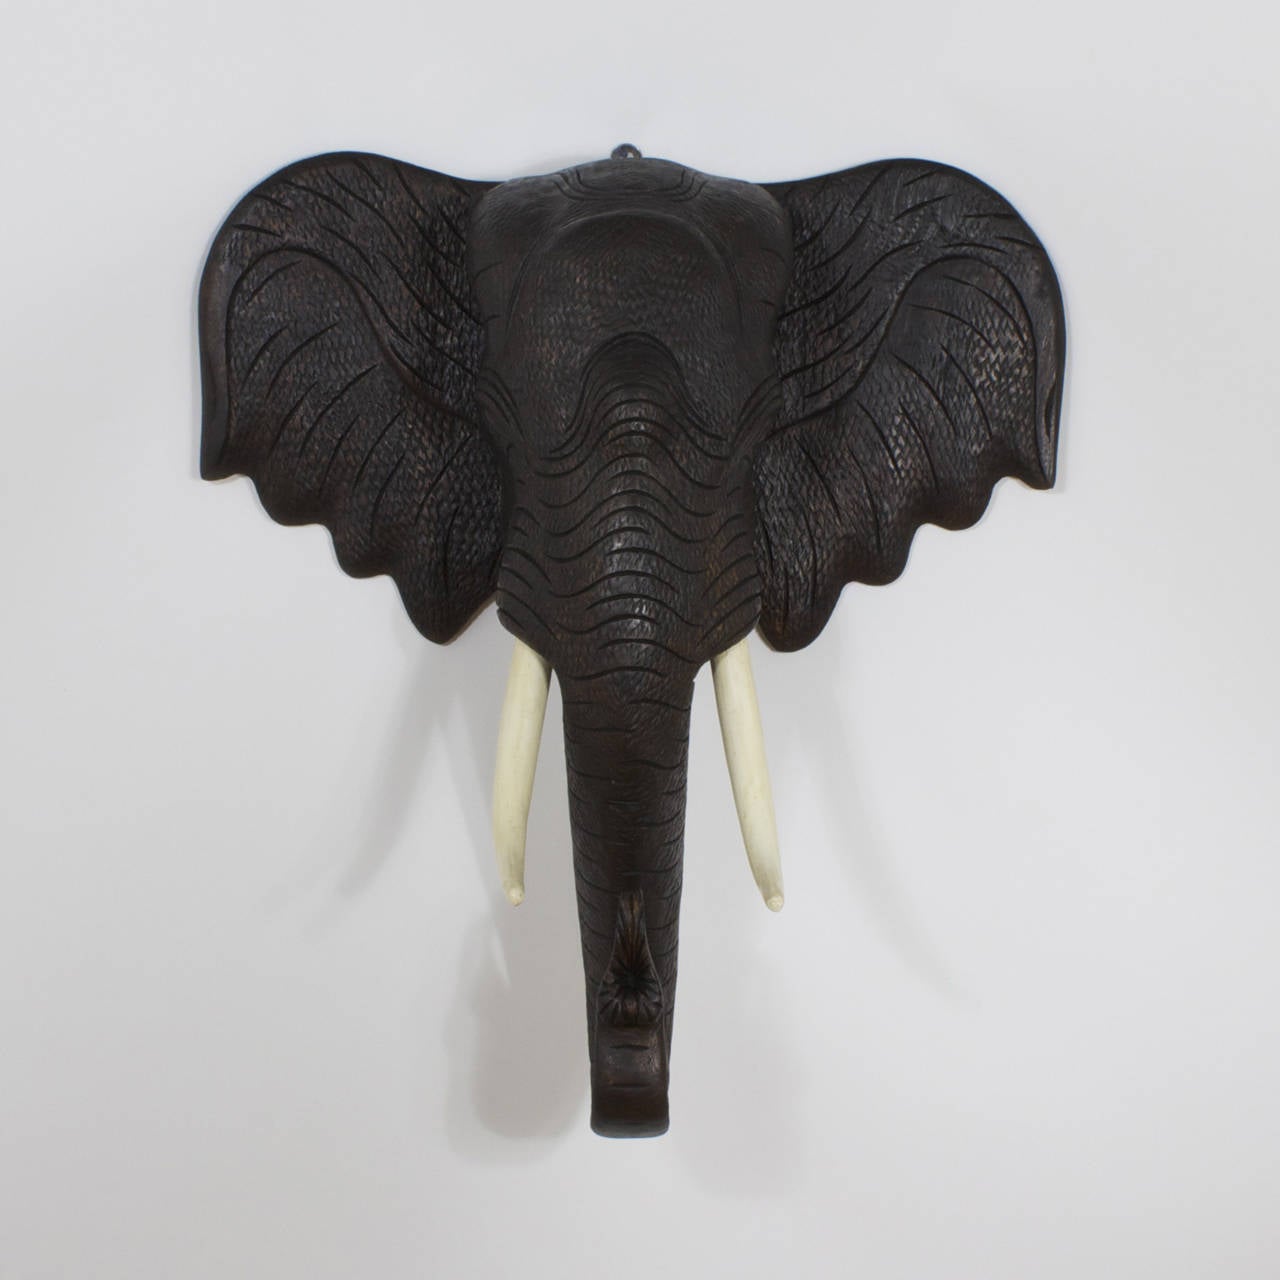 This large carved hardwood elephant head has amazing life like skin texture and striking realistic presence. Capturing the spirit and wisdom of this majestic and mysterious creature with those all-knowing eyes. Featuring carved wood tusks, turned up